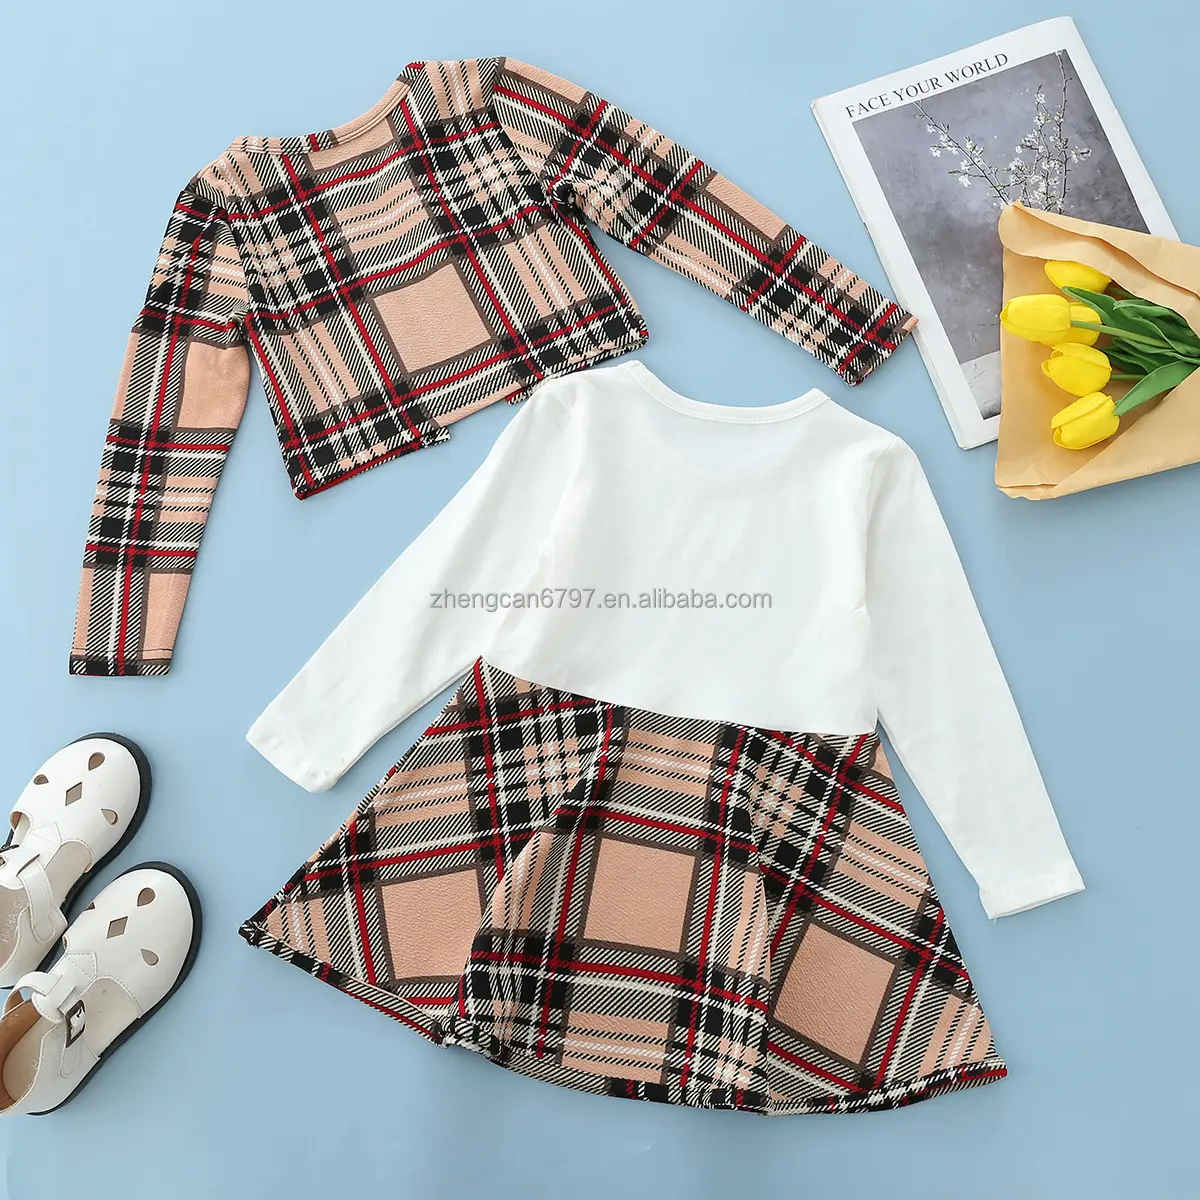 2022 Autumn Girls' Tops Suit Plaid Printed Dress Babies Dresses And Suits